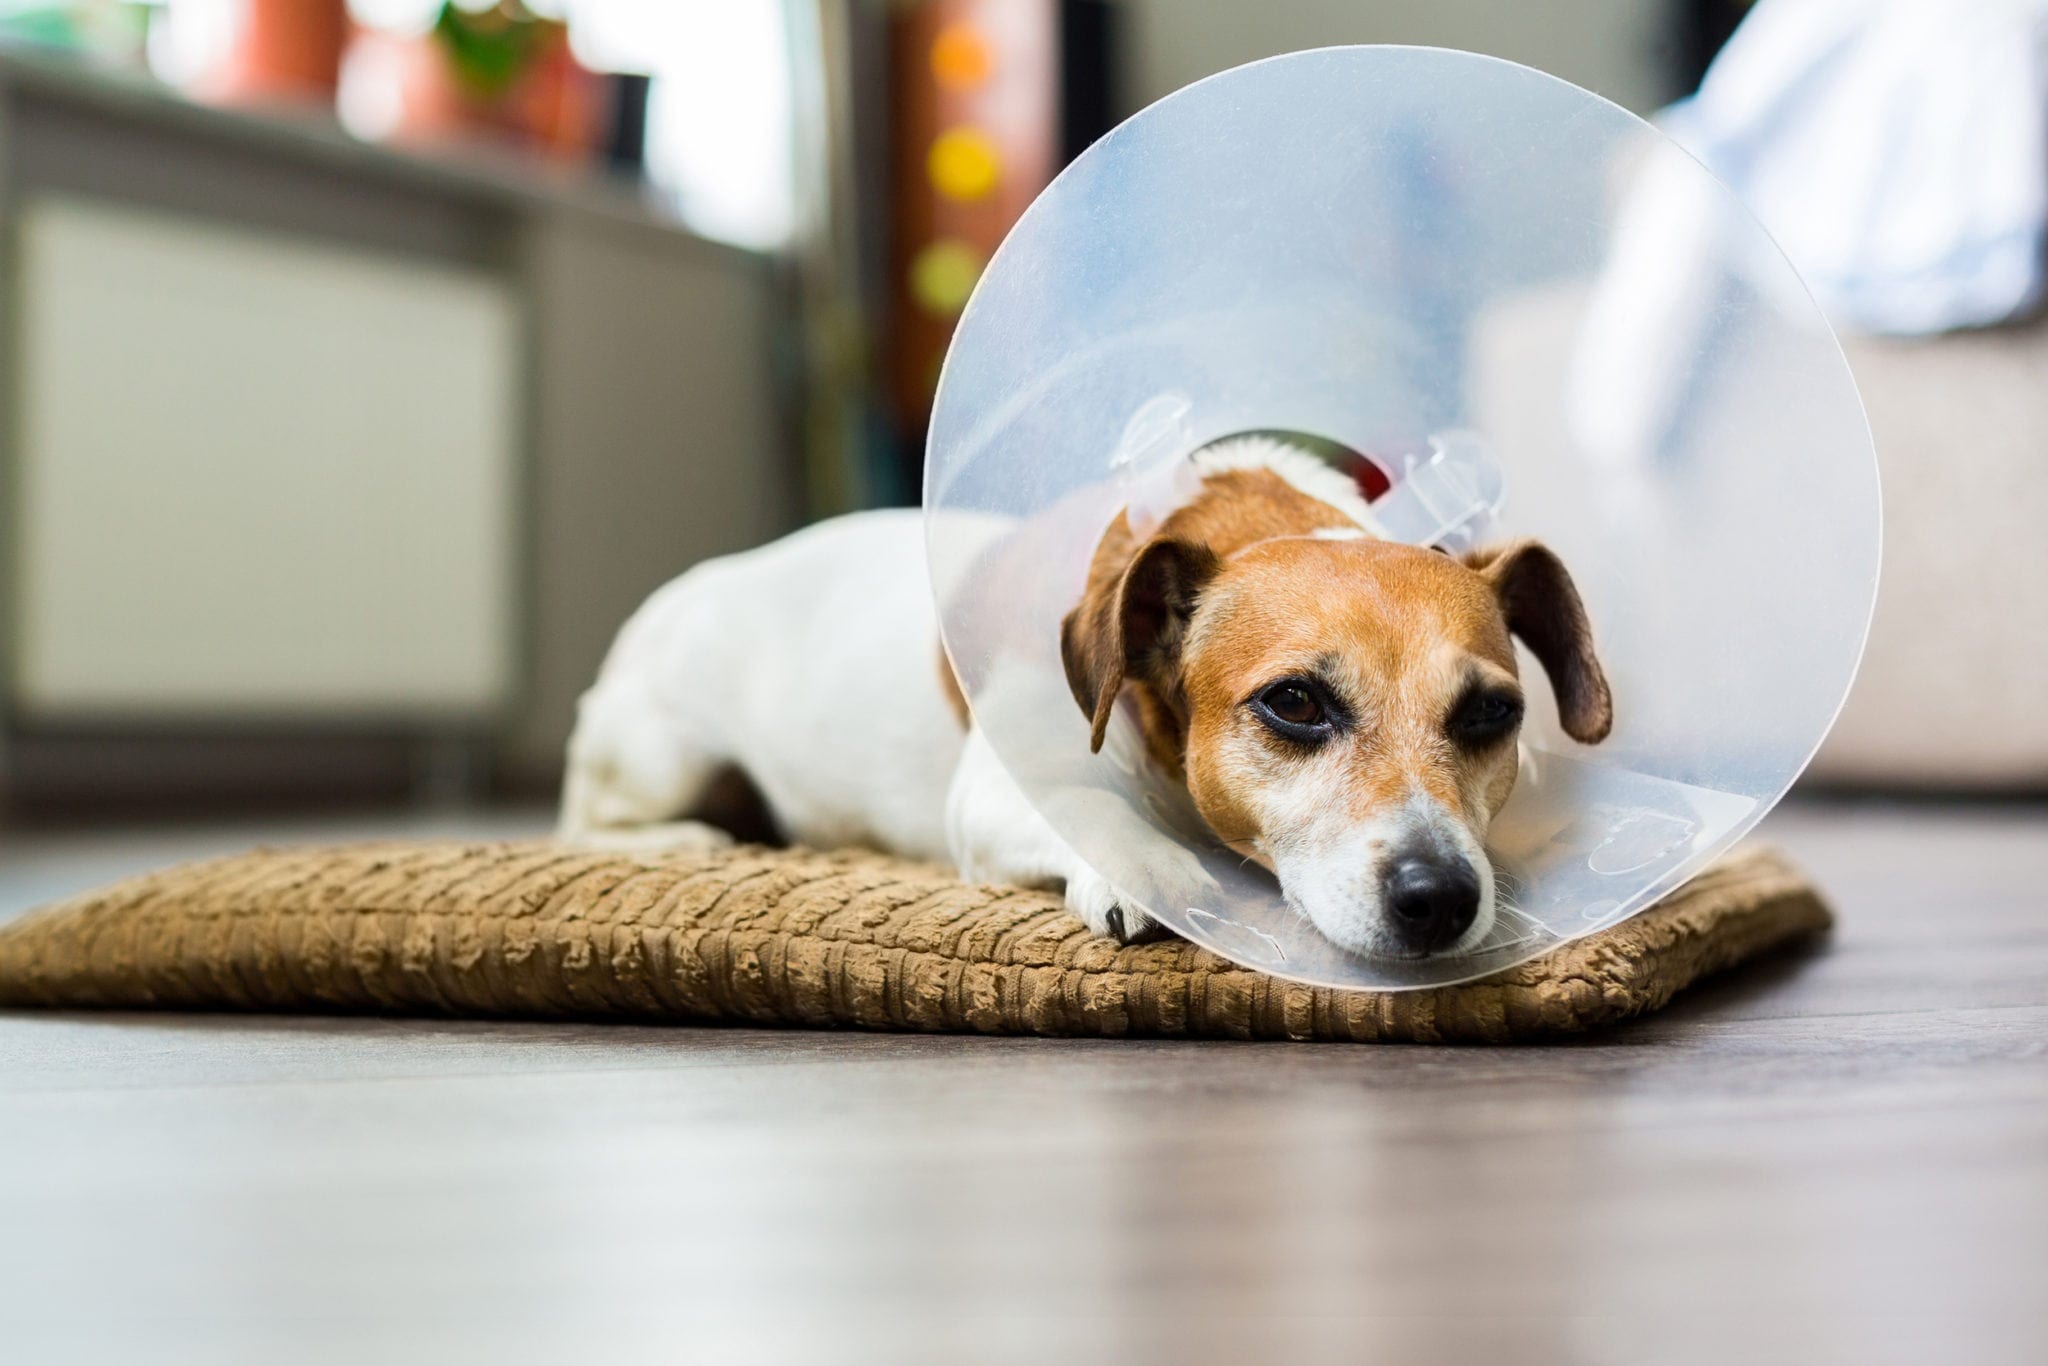 a dog wearing a veterinary cone while laying down on a mat on the wooden floor